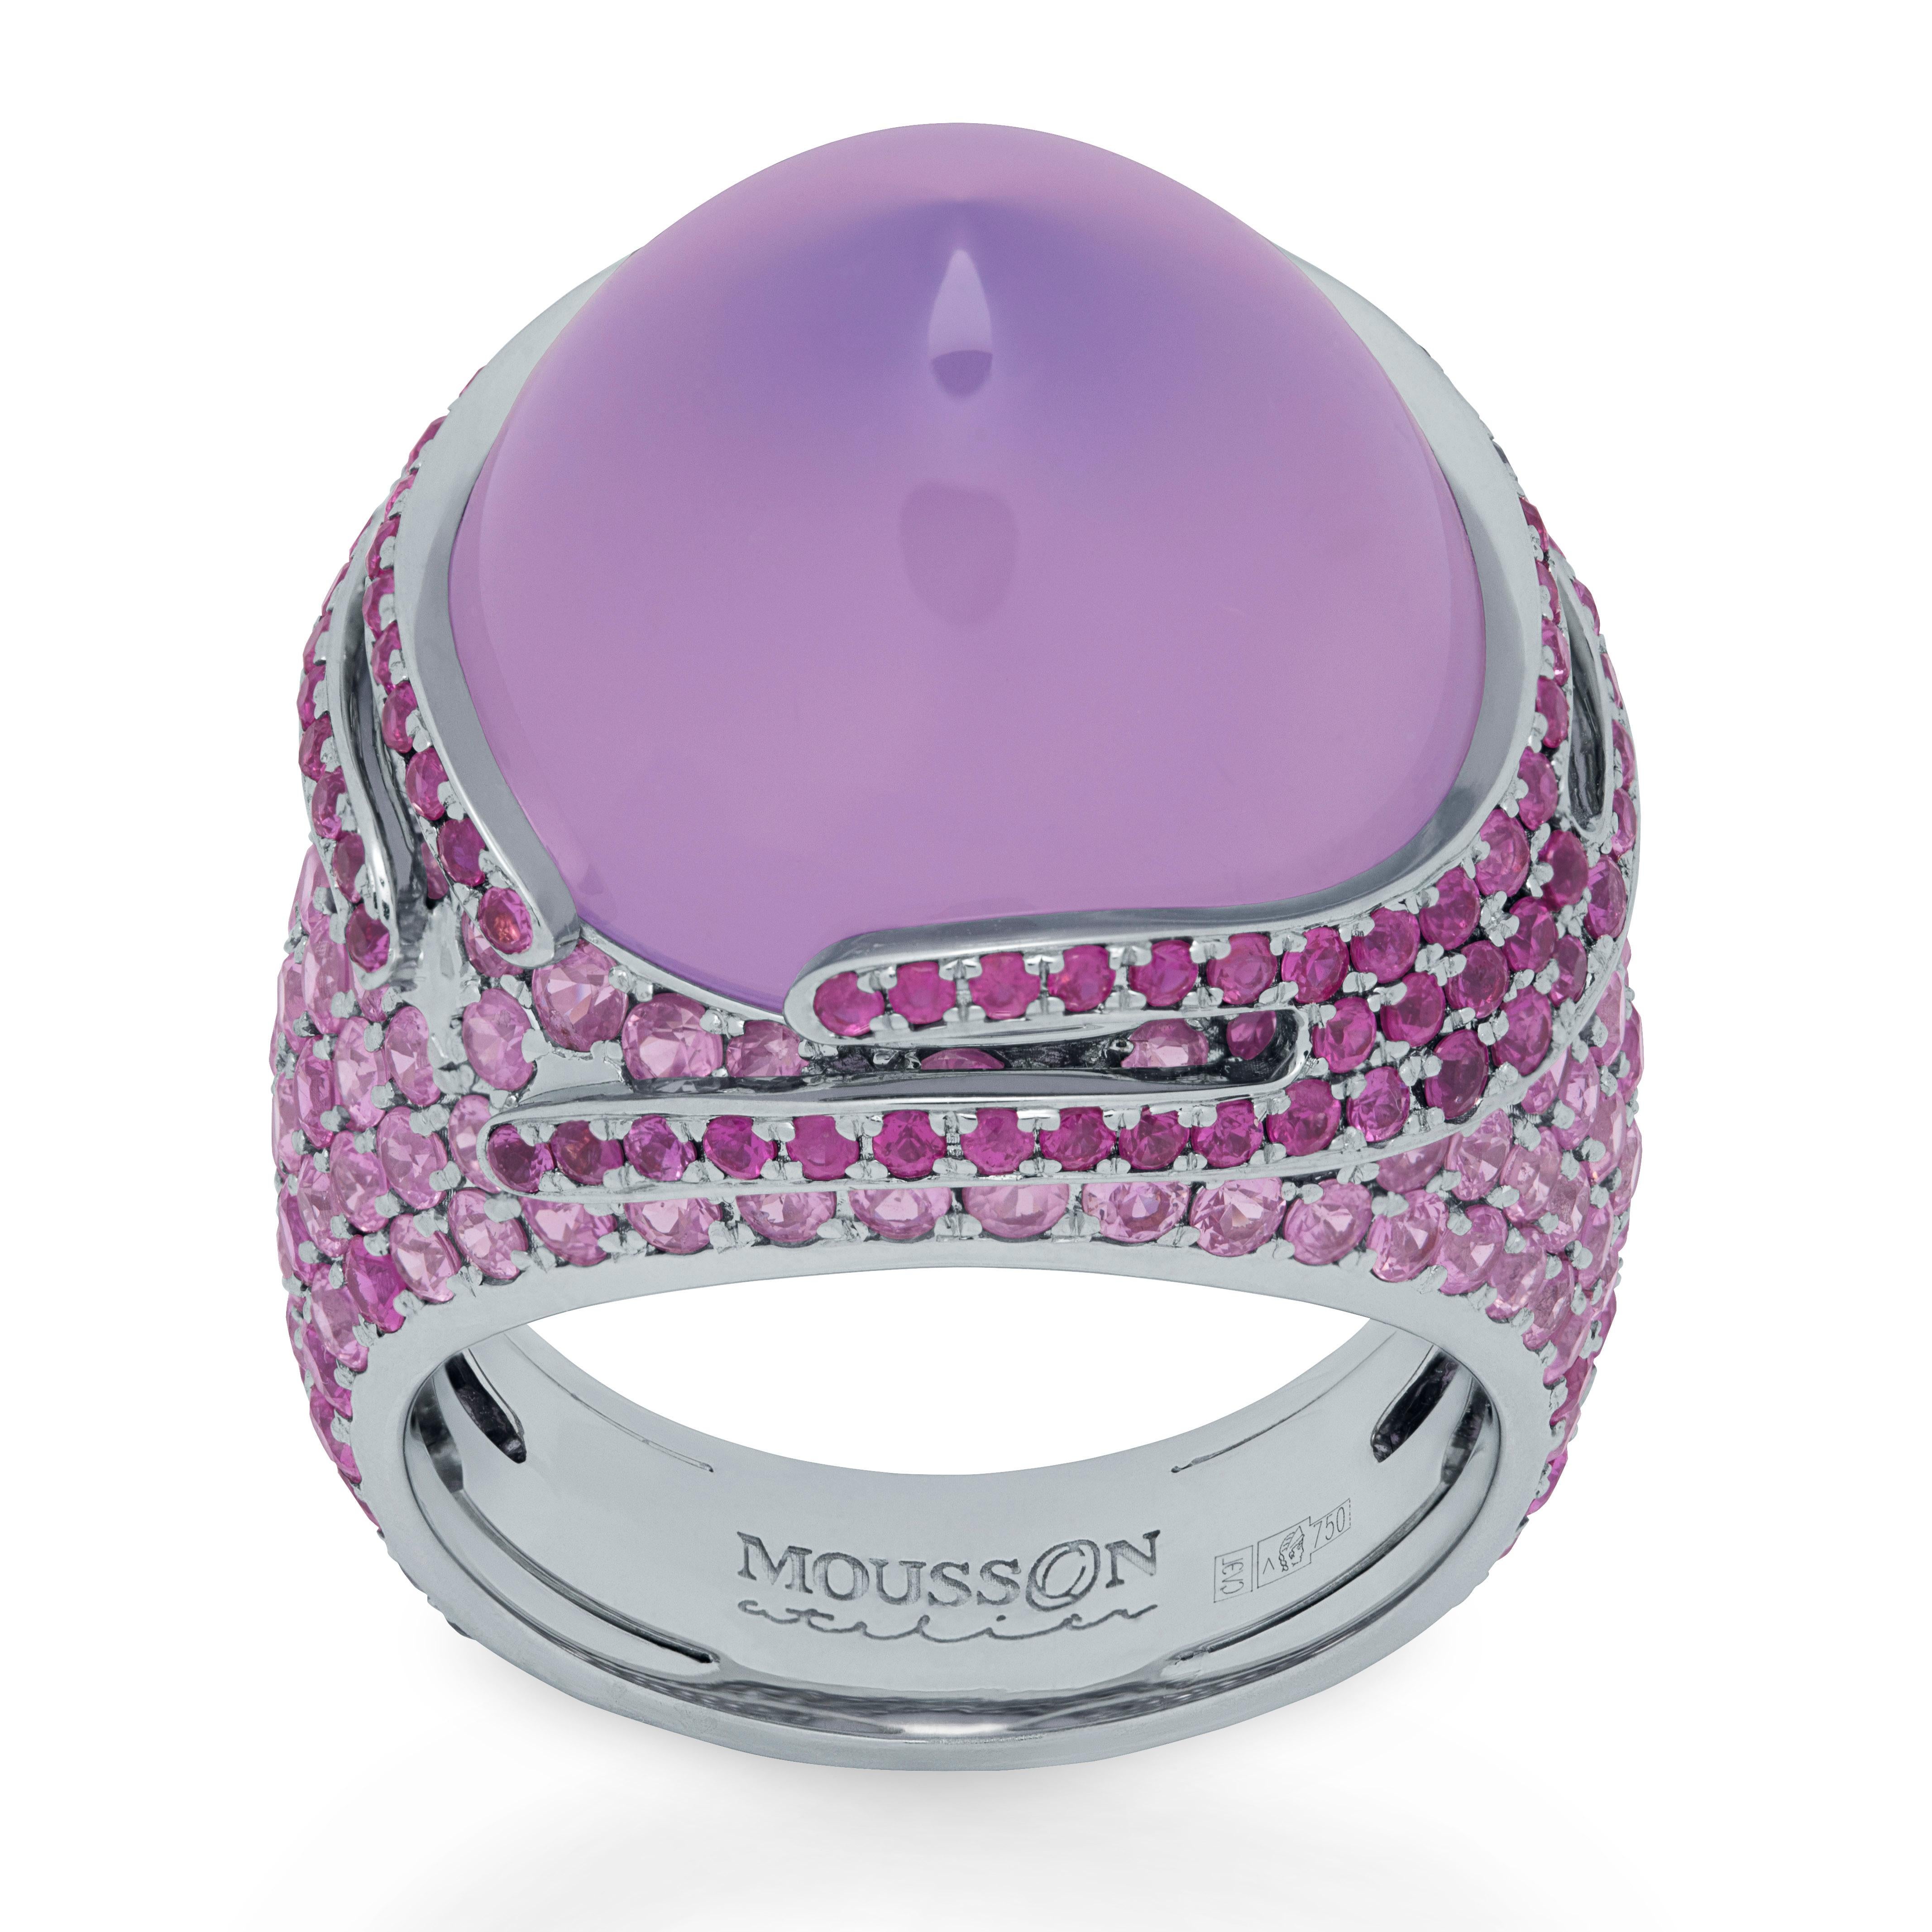 Lavender Quartz 25.63 Carat Pink Sapphires 18 Karat White Gold Fuji Ring
Series of these Rings isn't called Fuji for nothing, since the inspiration for the creation of these products came to us exactly from the contemplation of this majestic